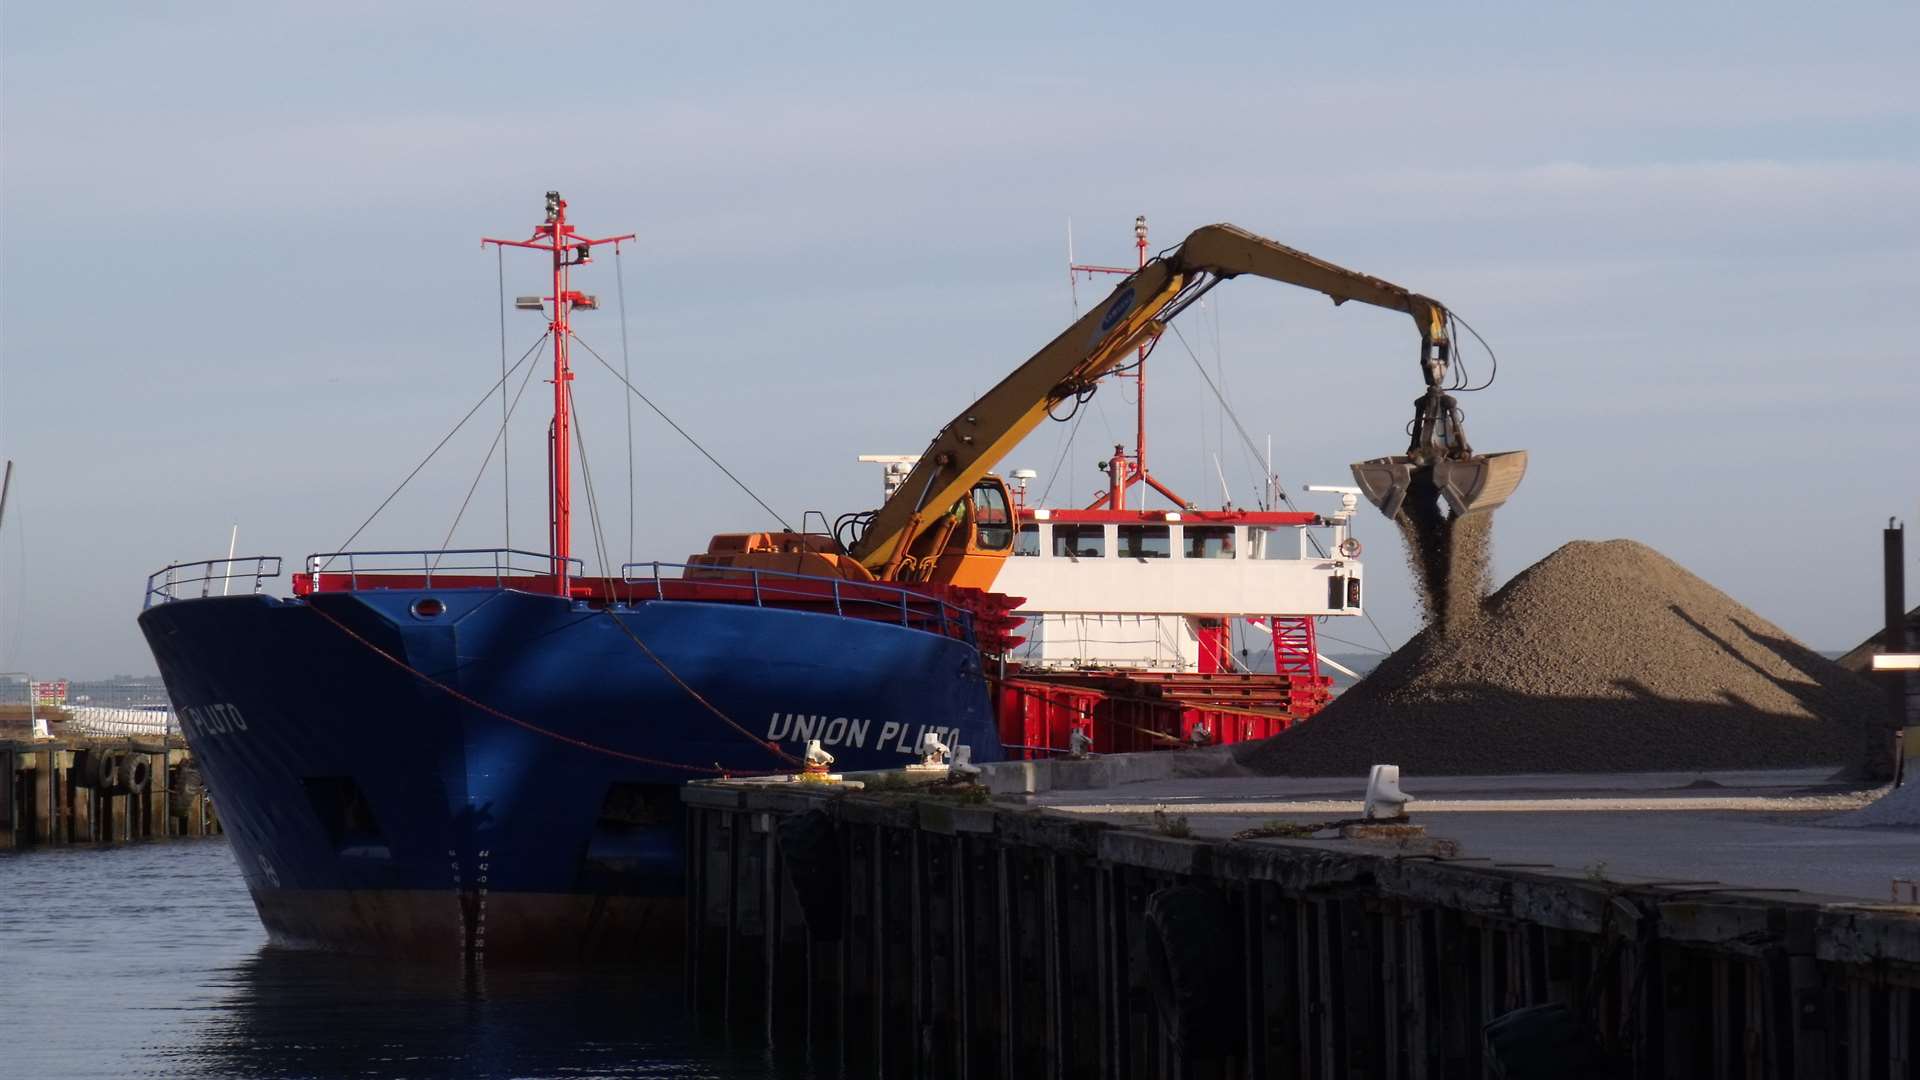 Harbour bosses have dismissed a lack of commercial activity at the site